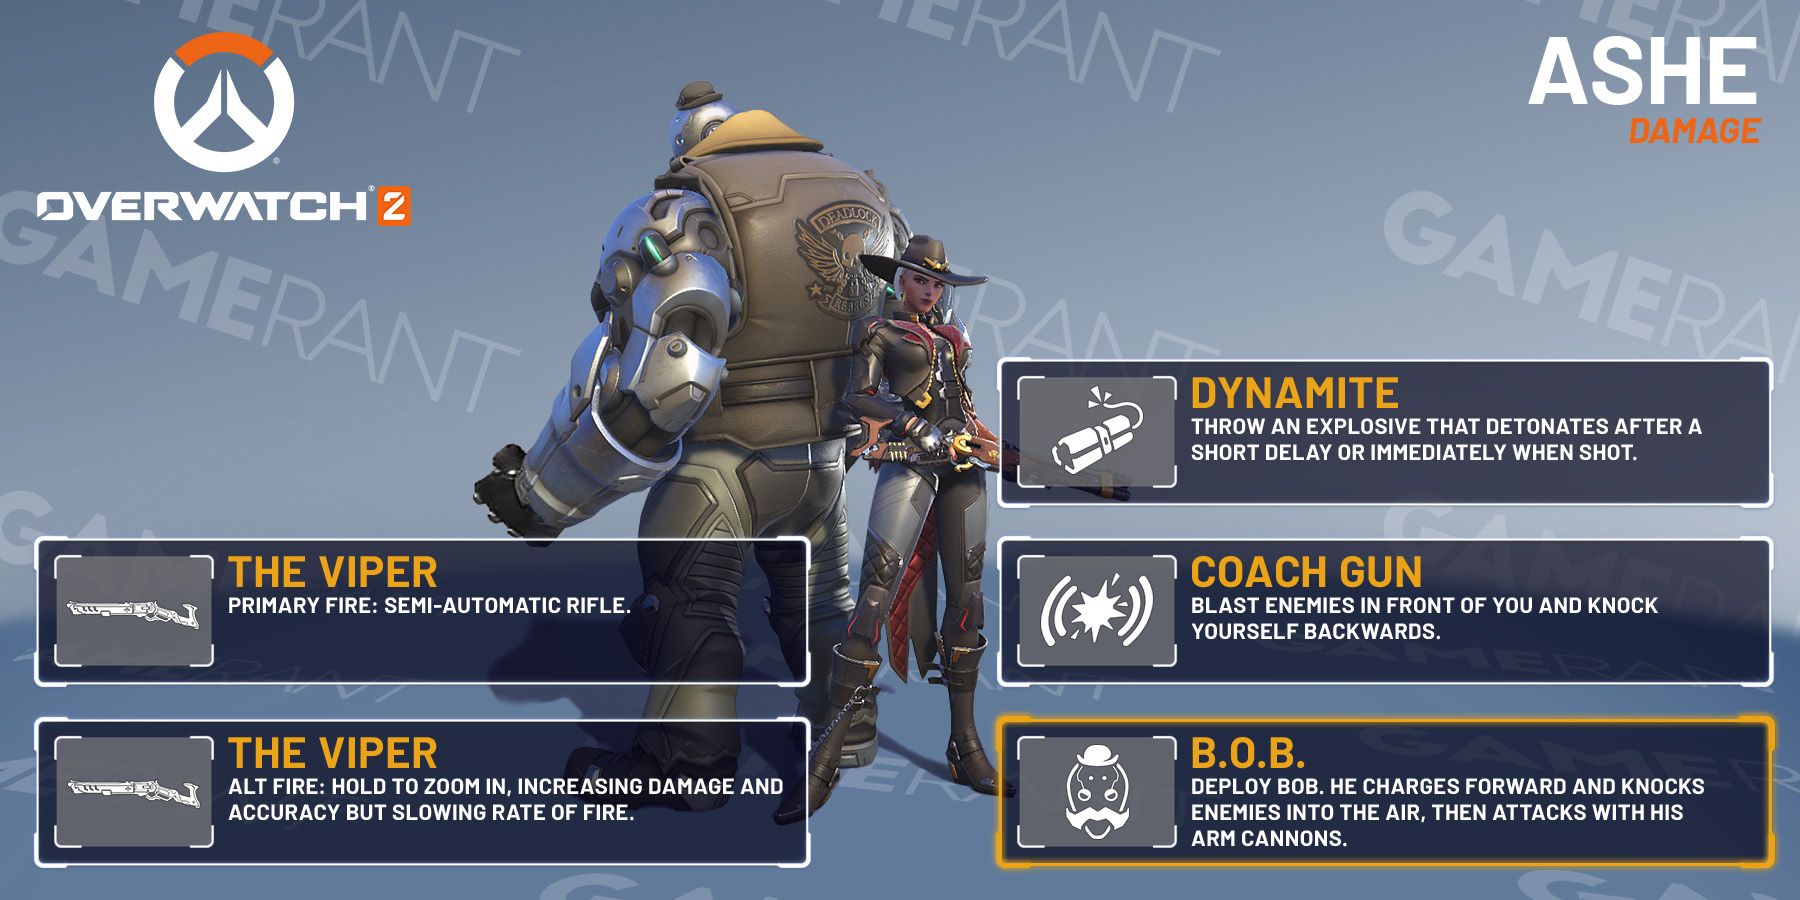 Overwatch 2: Ashe Guide (Tips, Abilities, And More